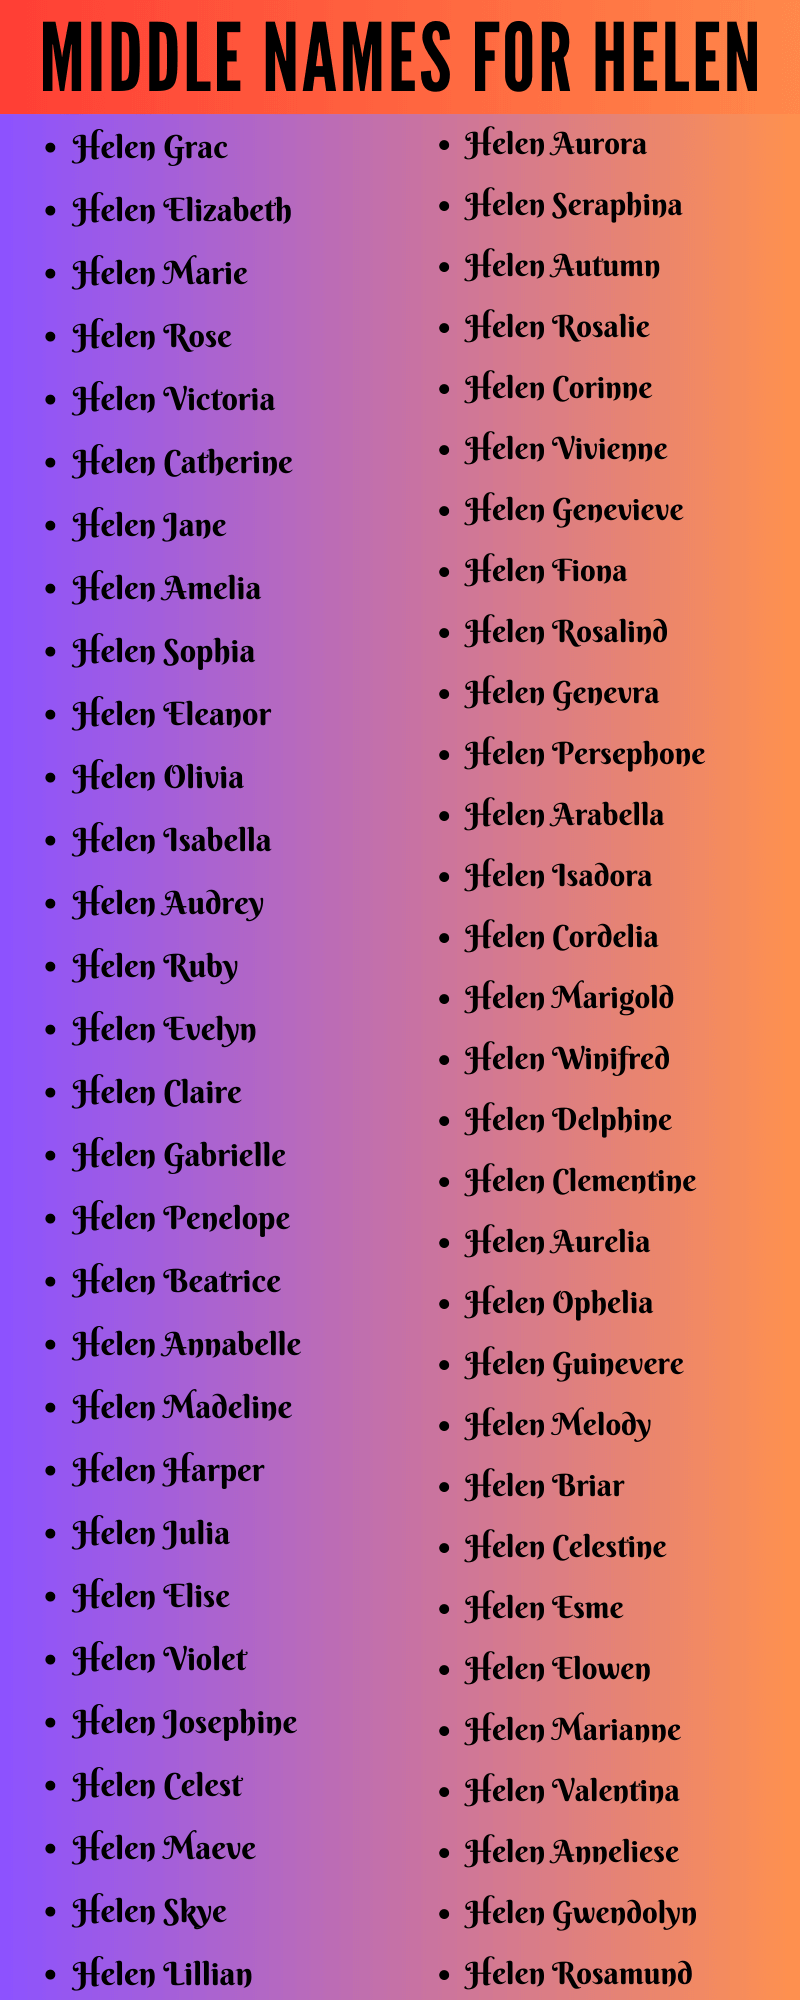 400 Unique Middle Names For Helen